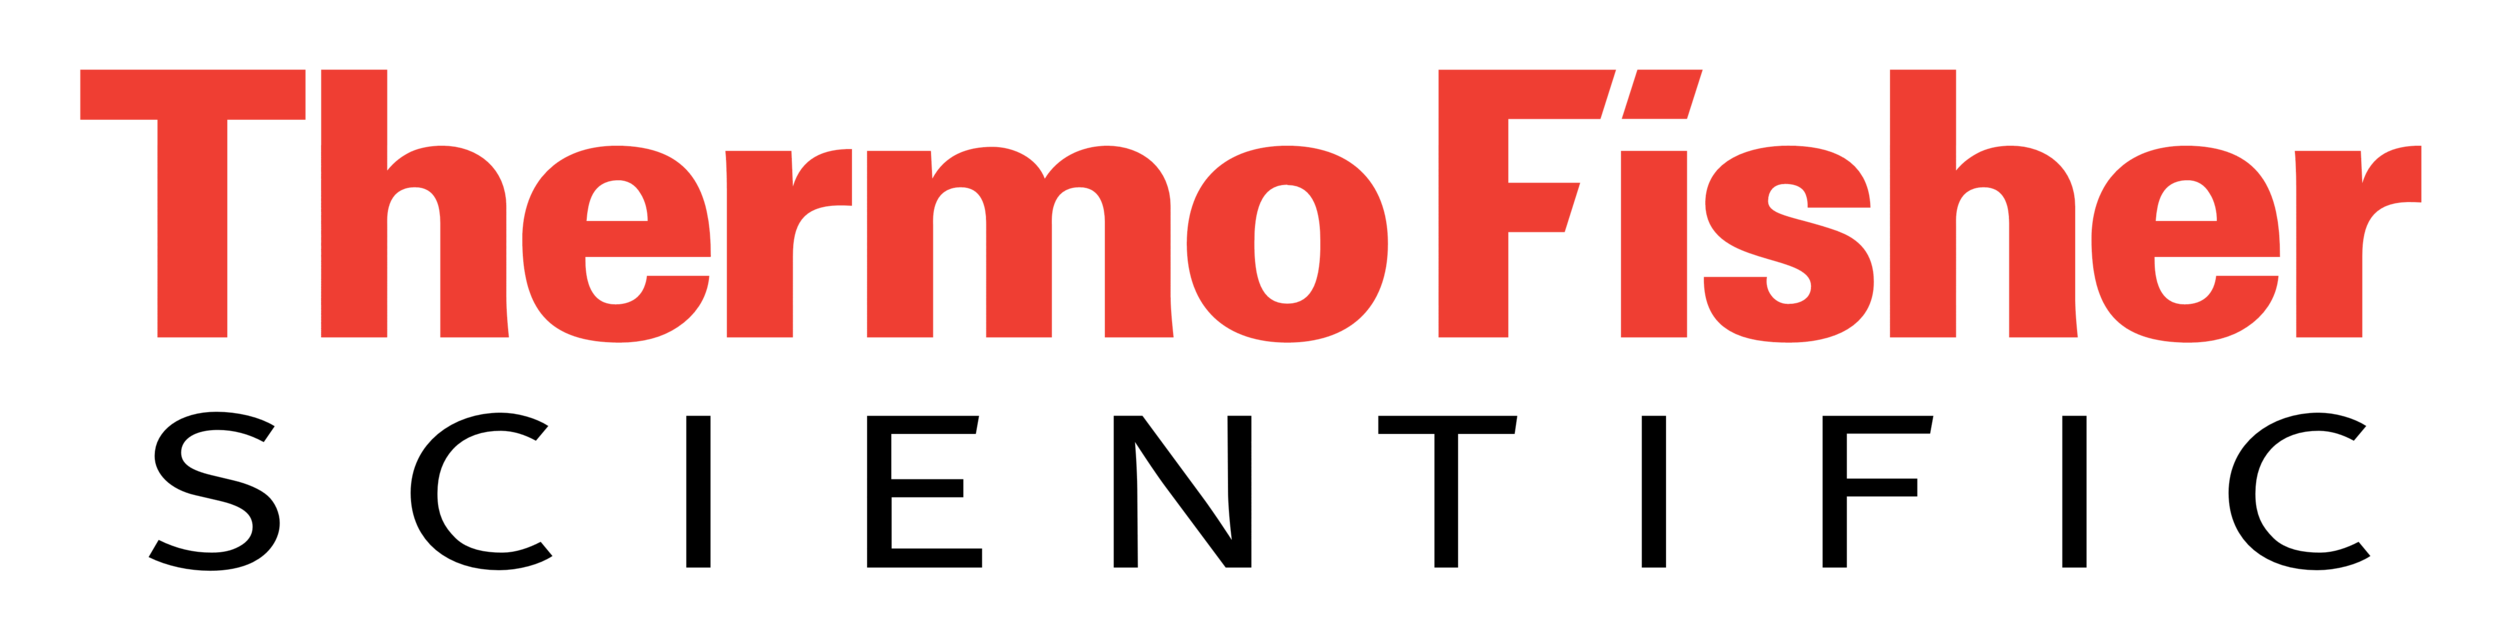 thermo-fisher-logo.png